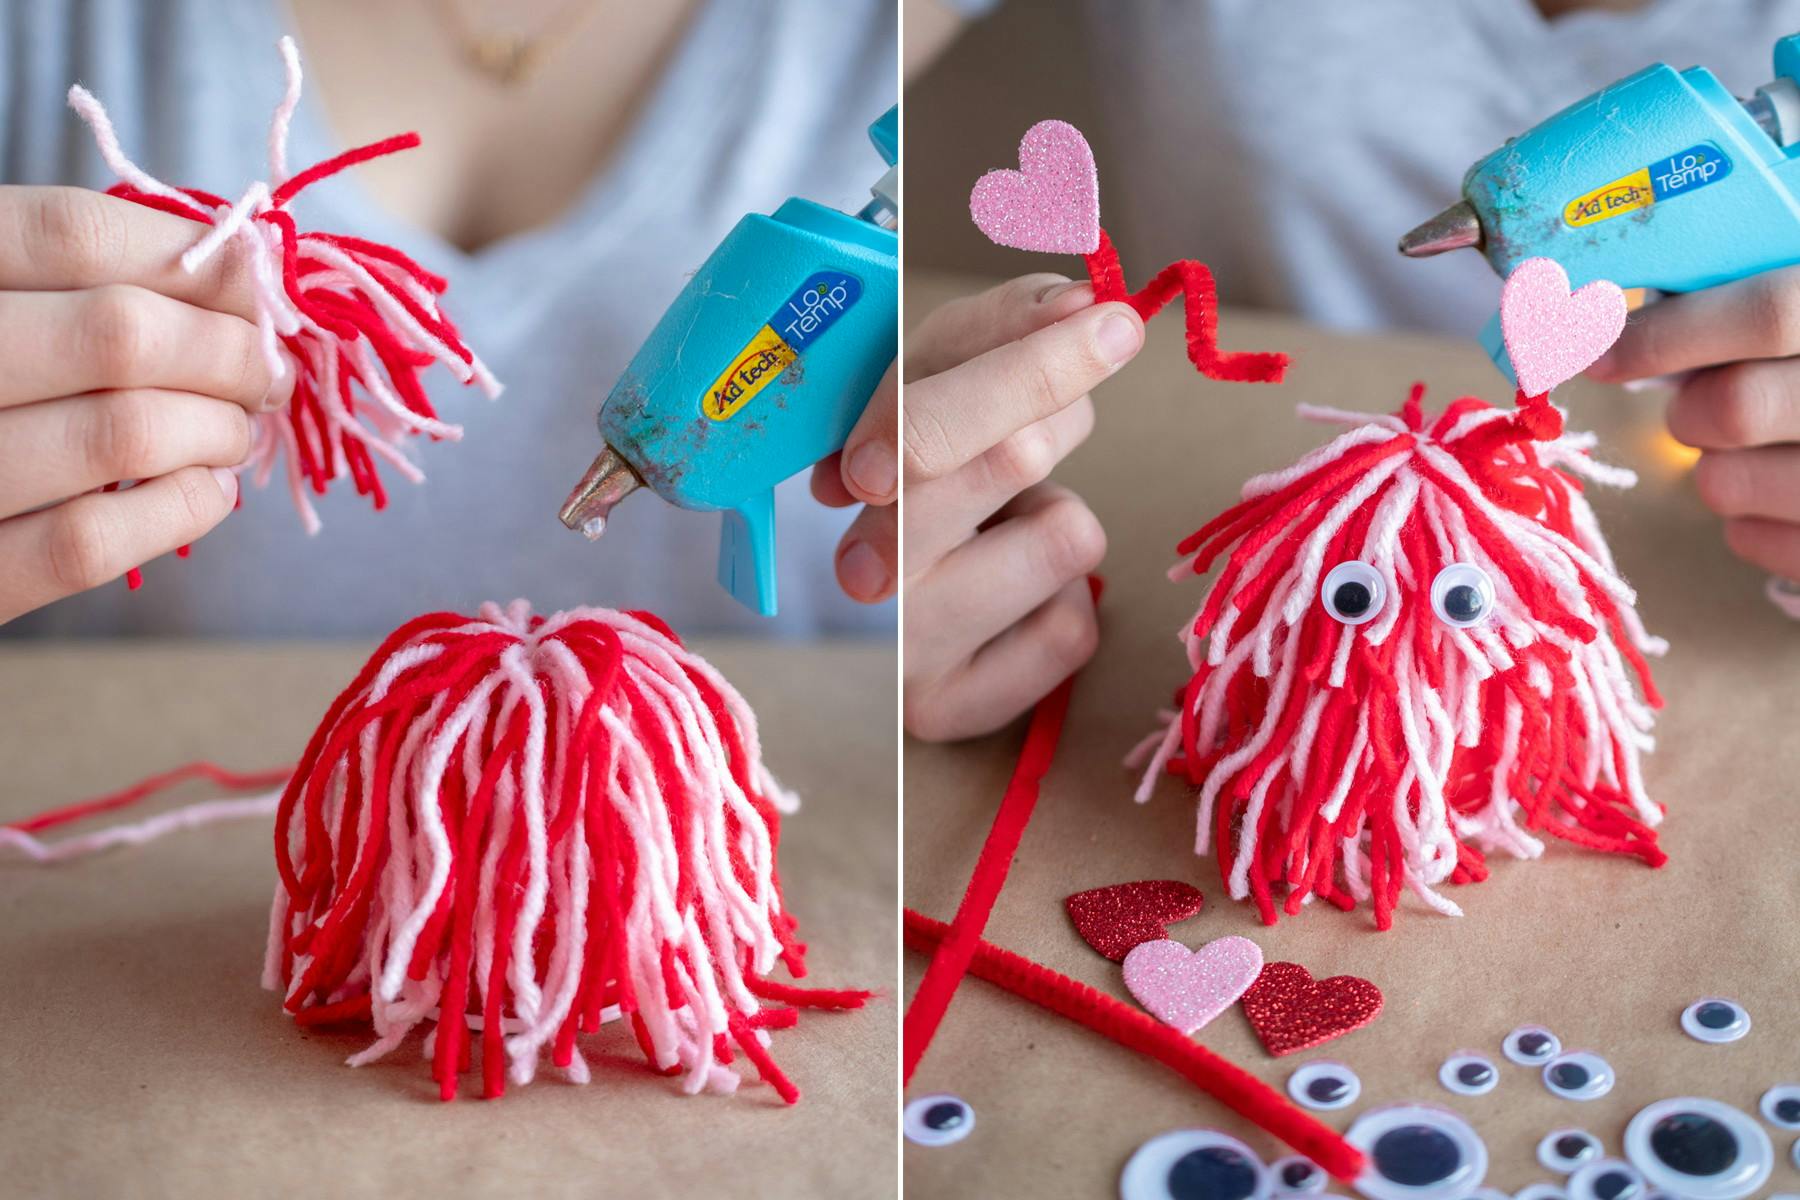 someone gluing yarn to more yarn and gluing pipe cleaners with hearts on the yarn